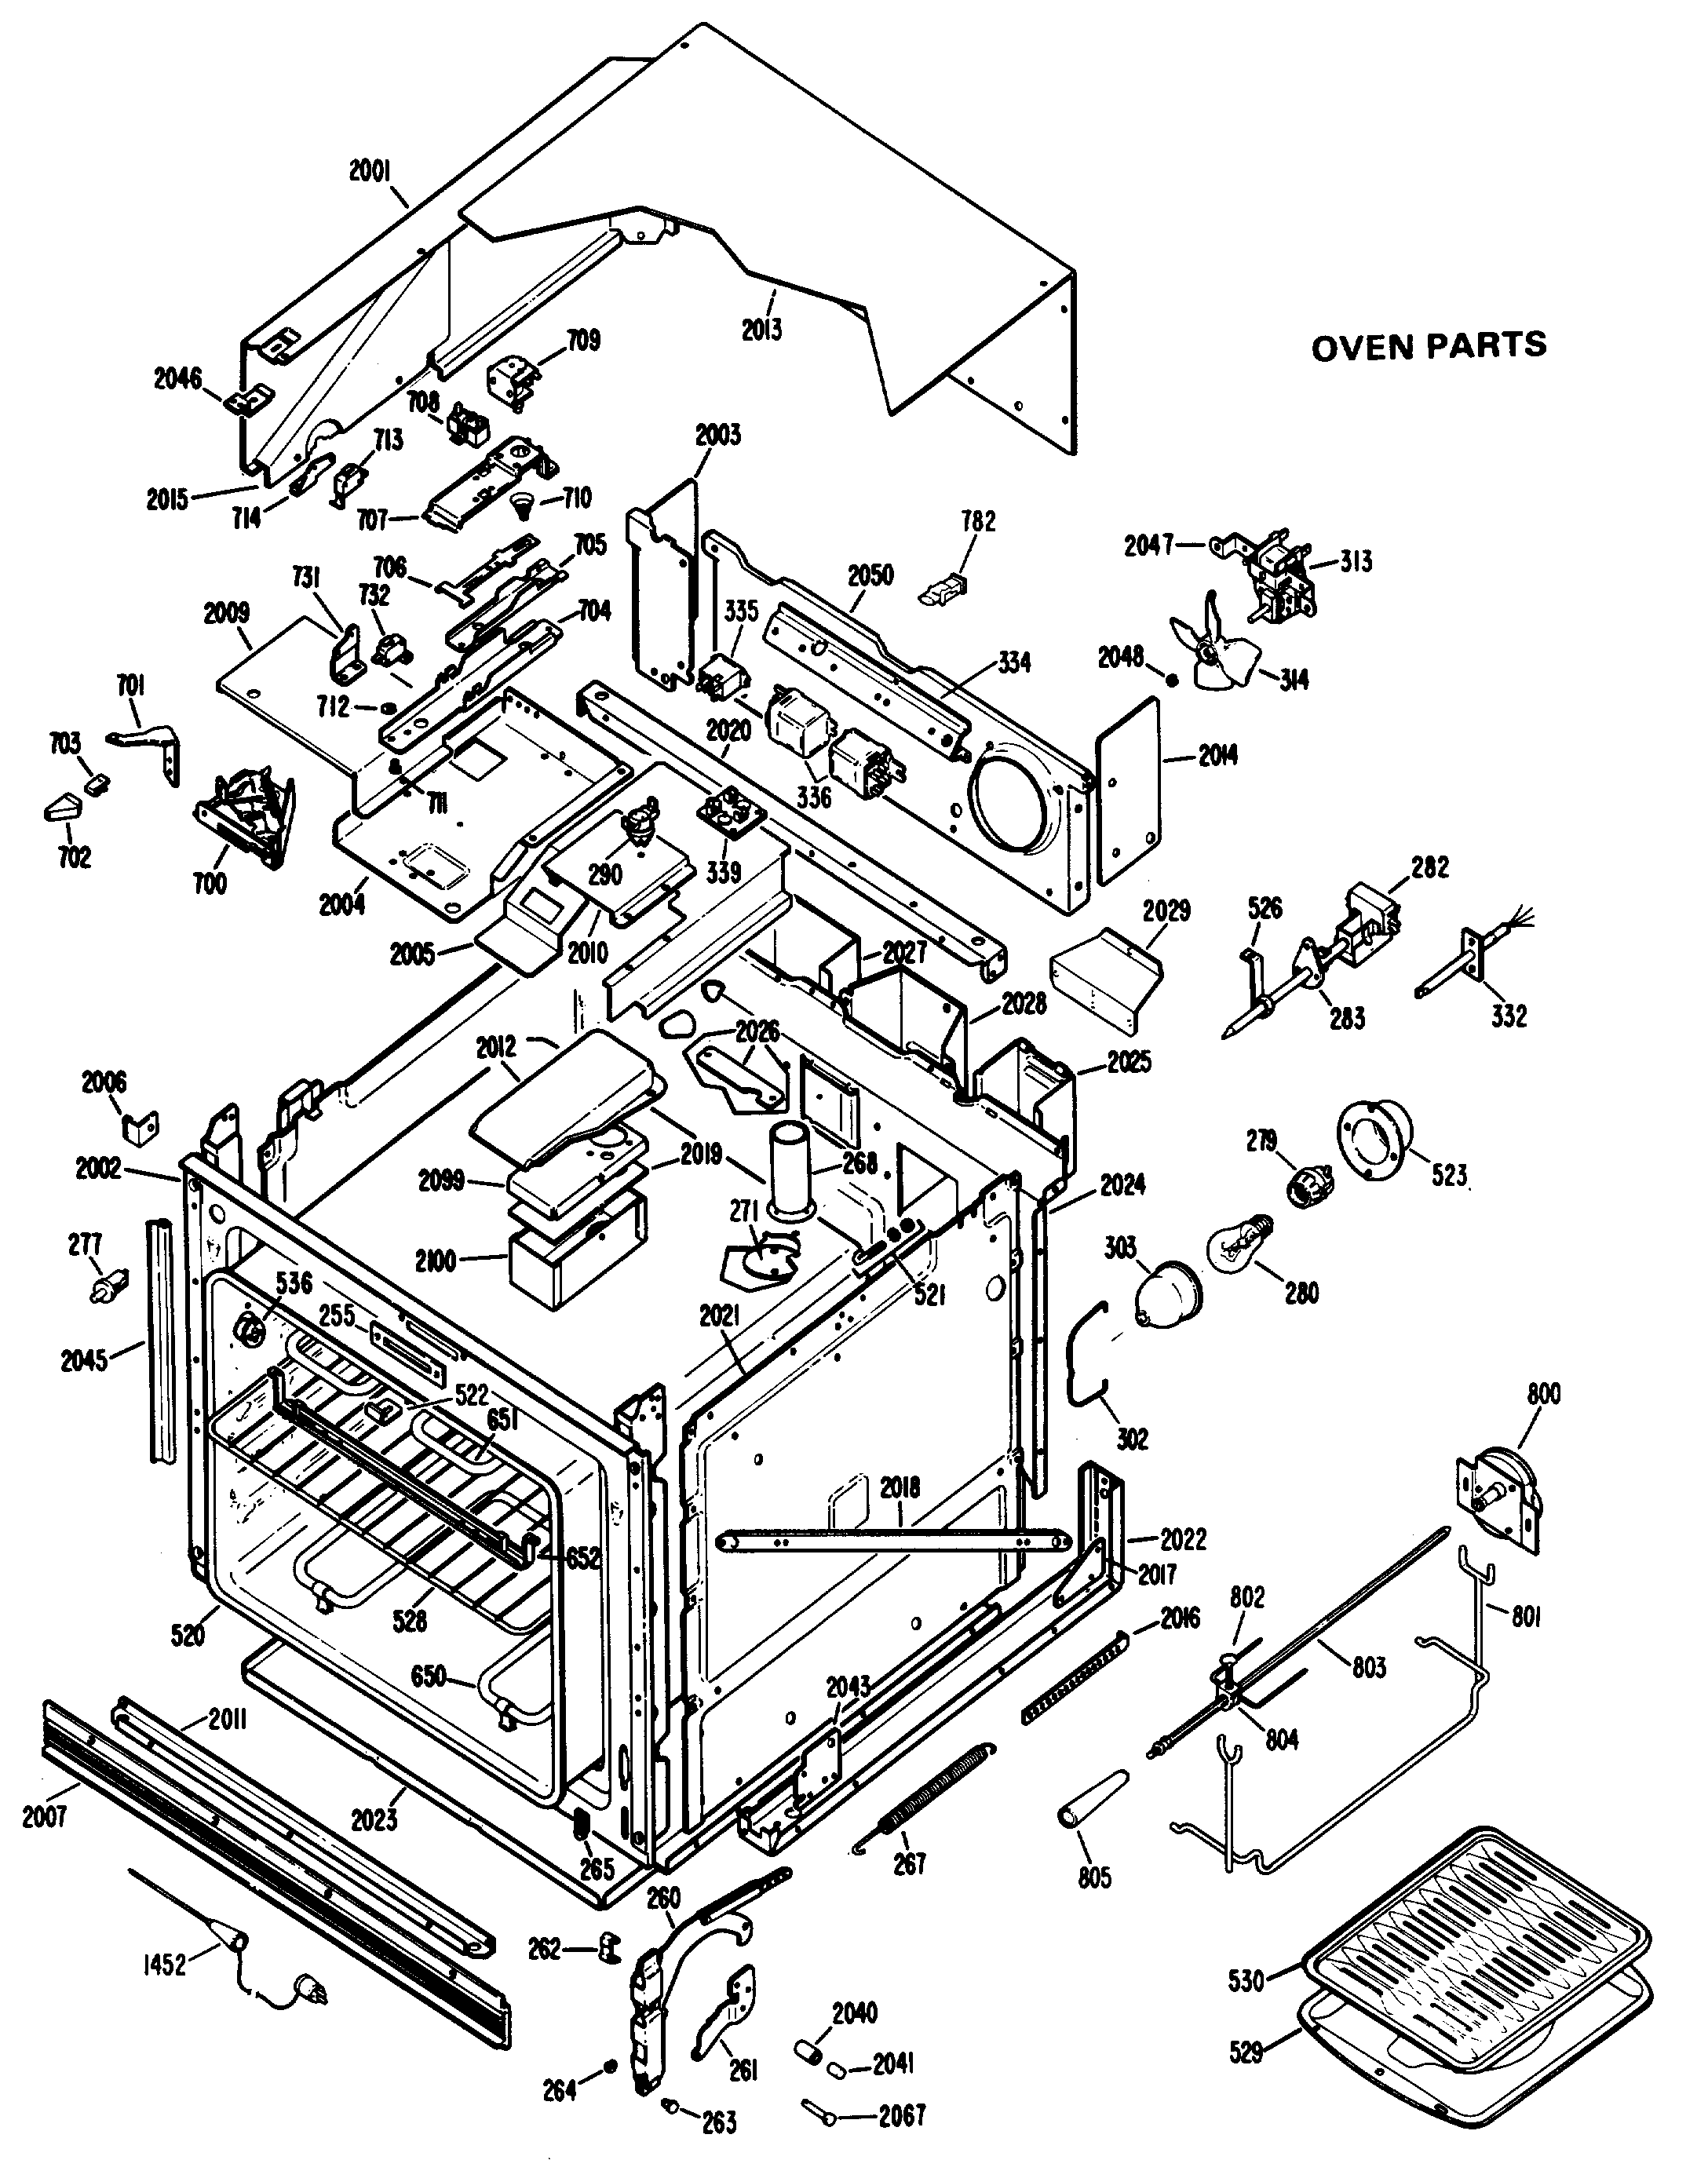 OVEN PARTS